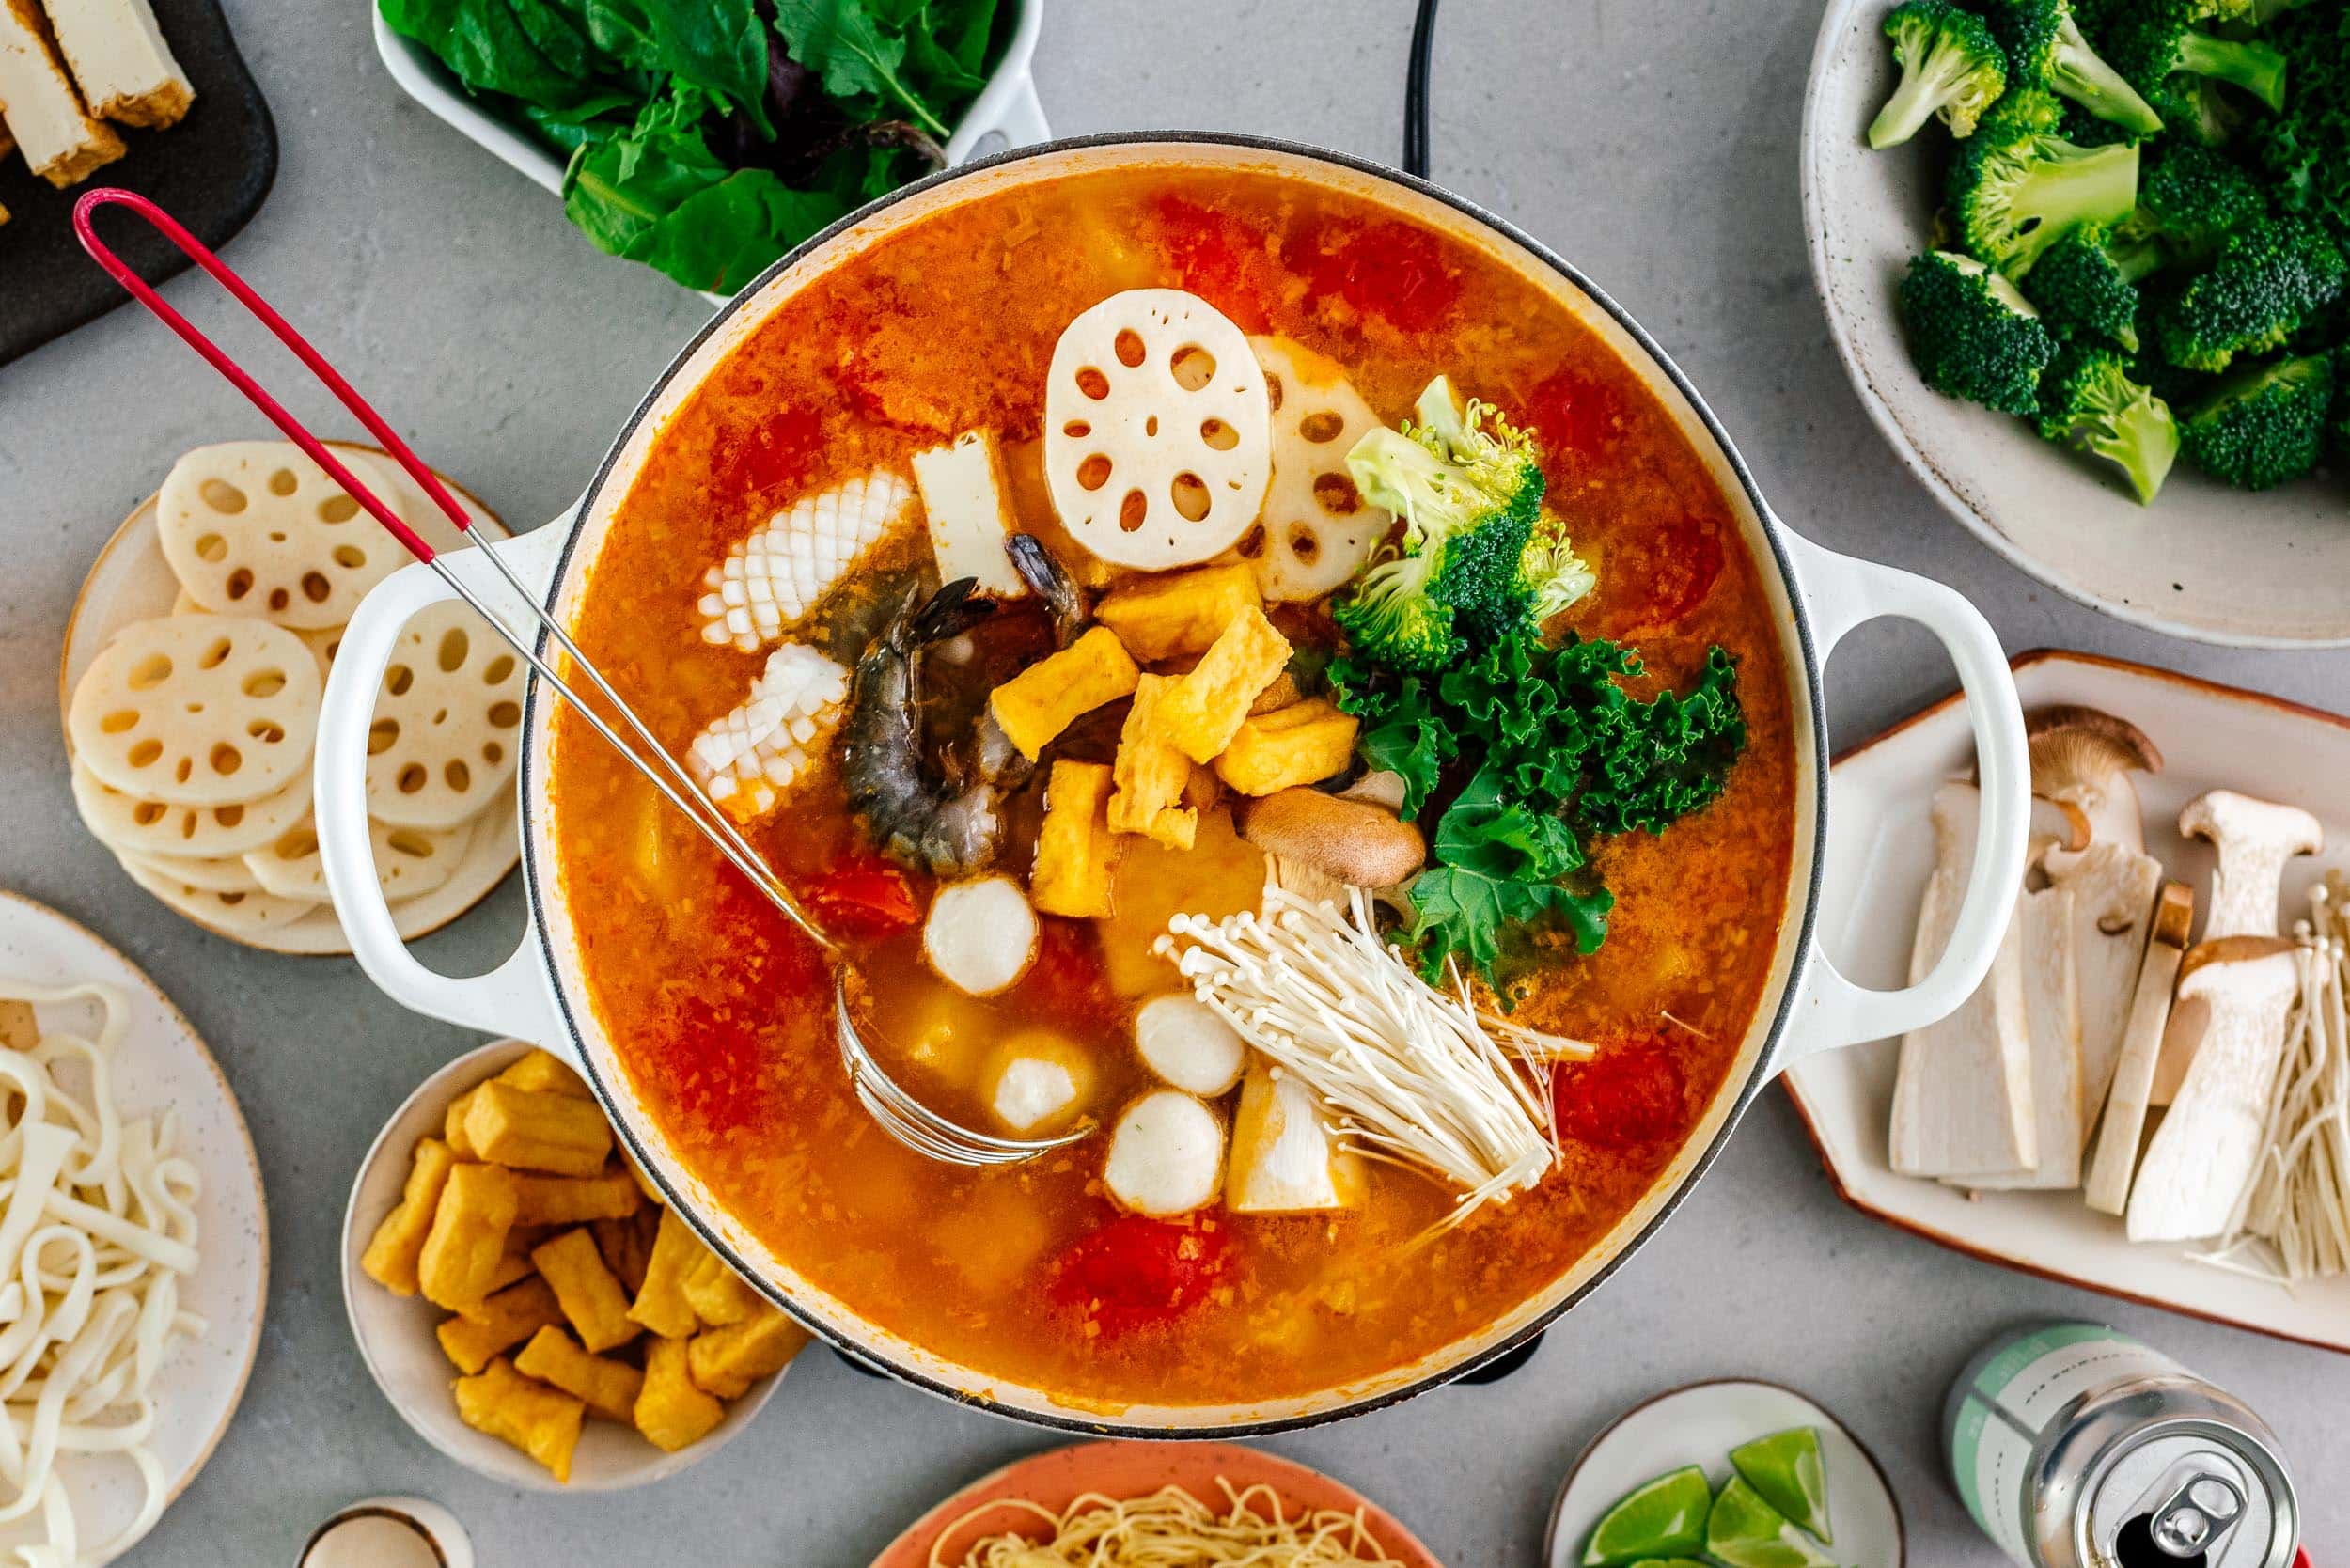 Where To Buy A Chinese Hot Pot